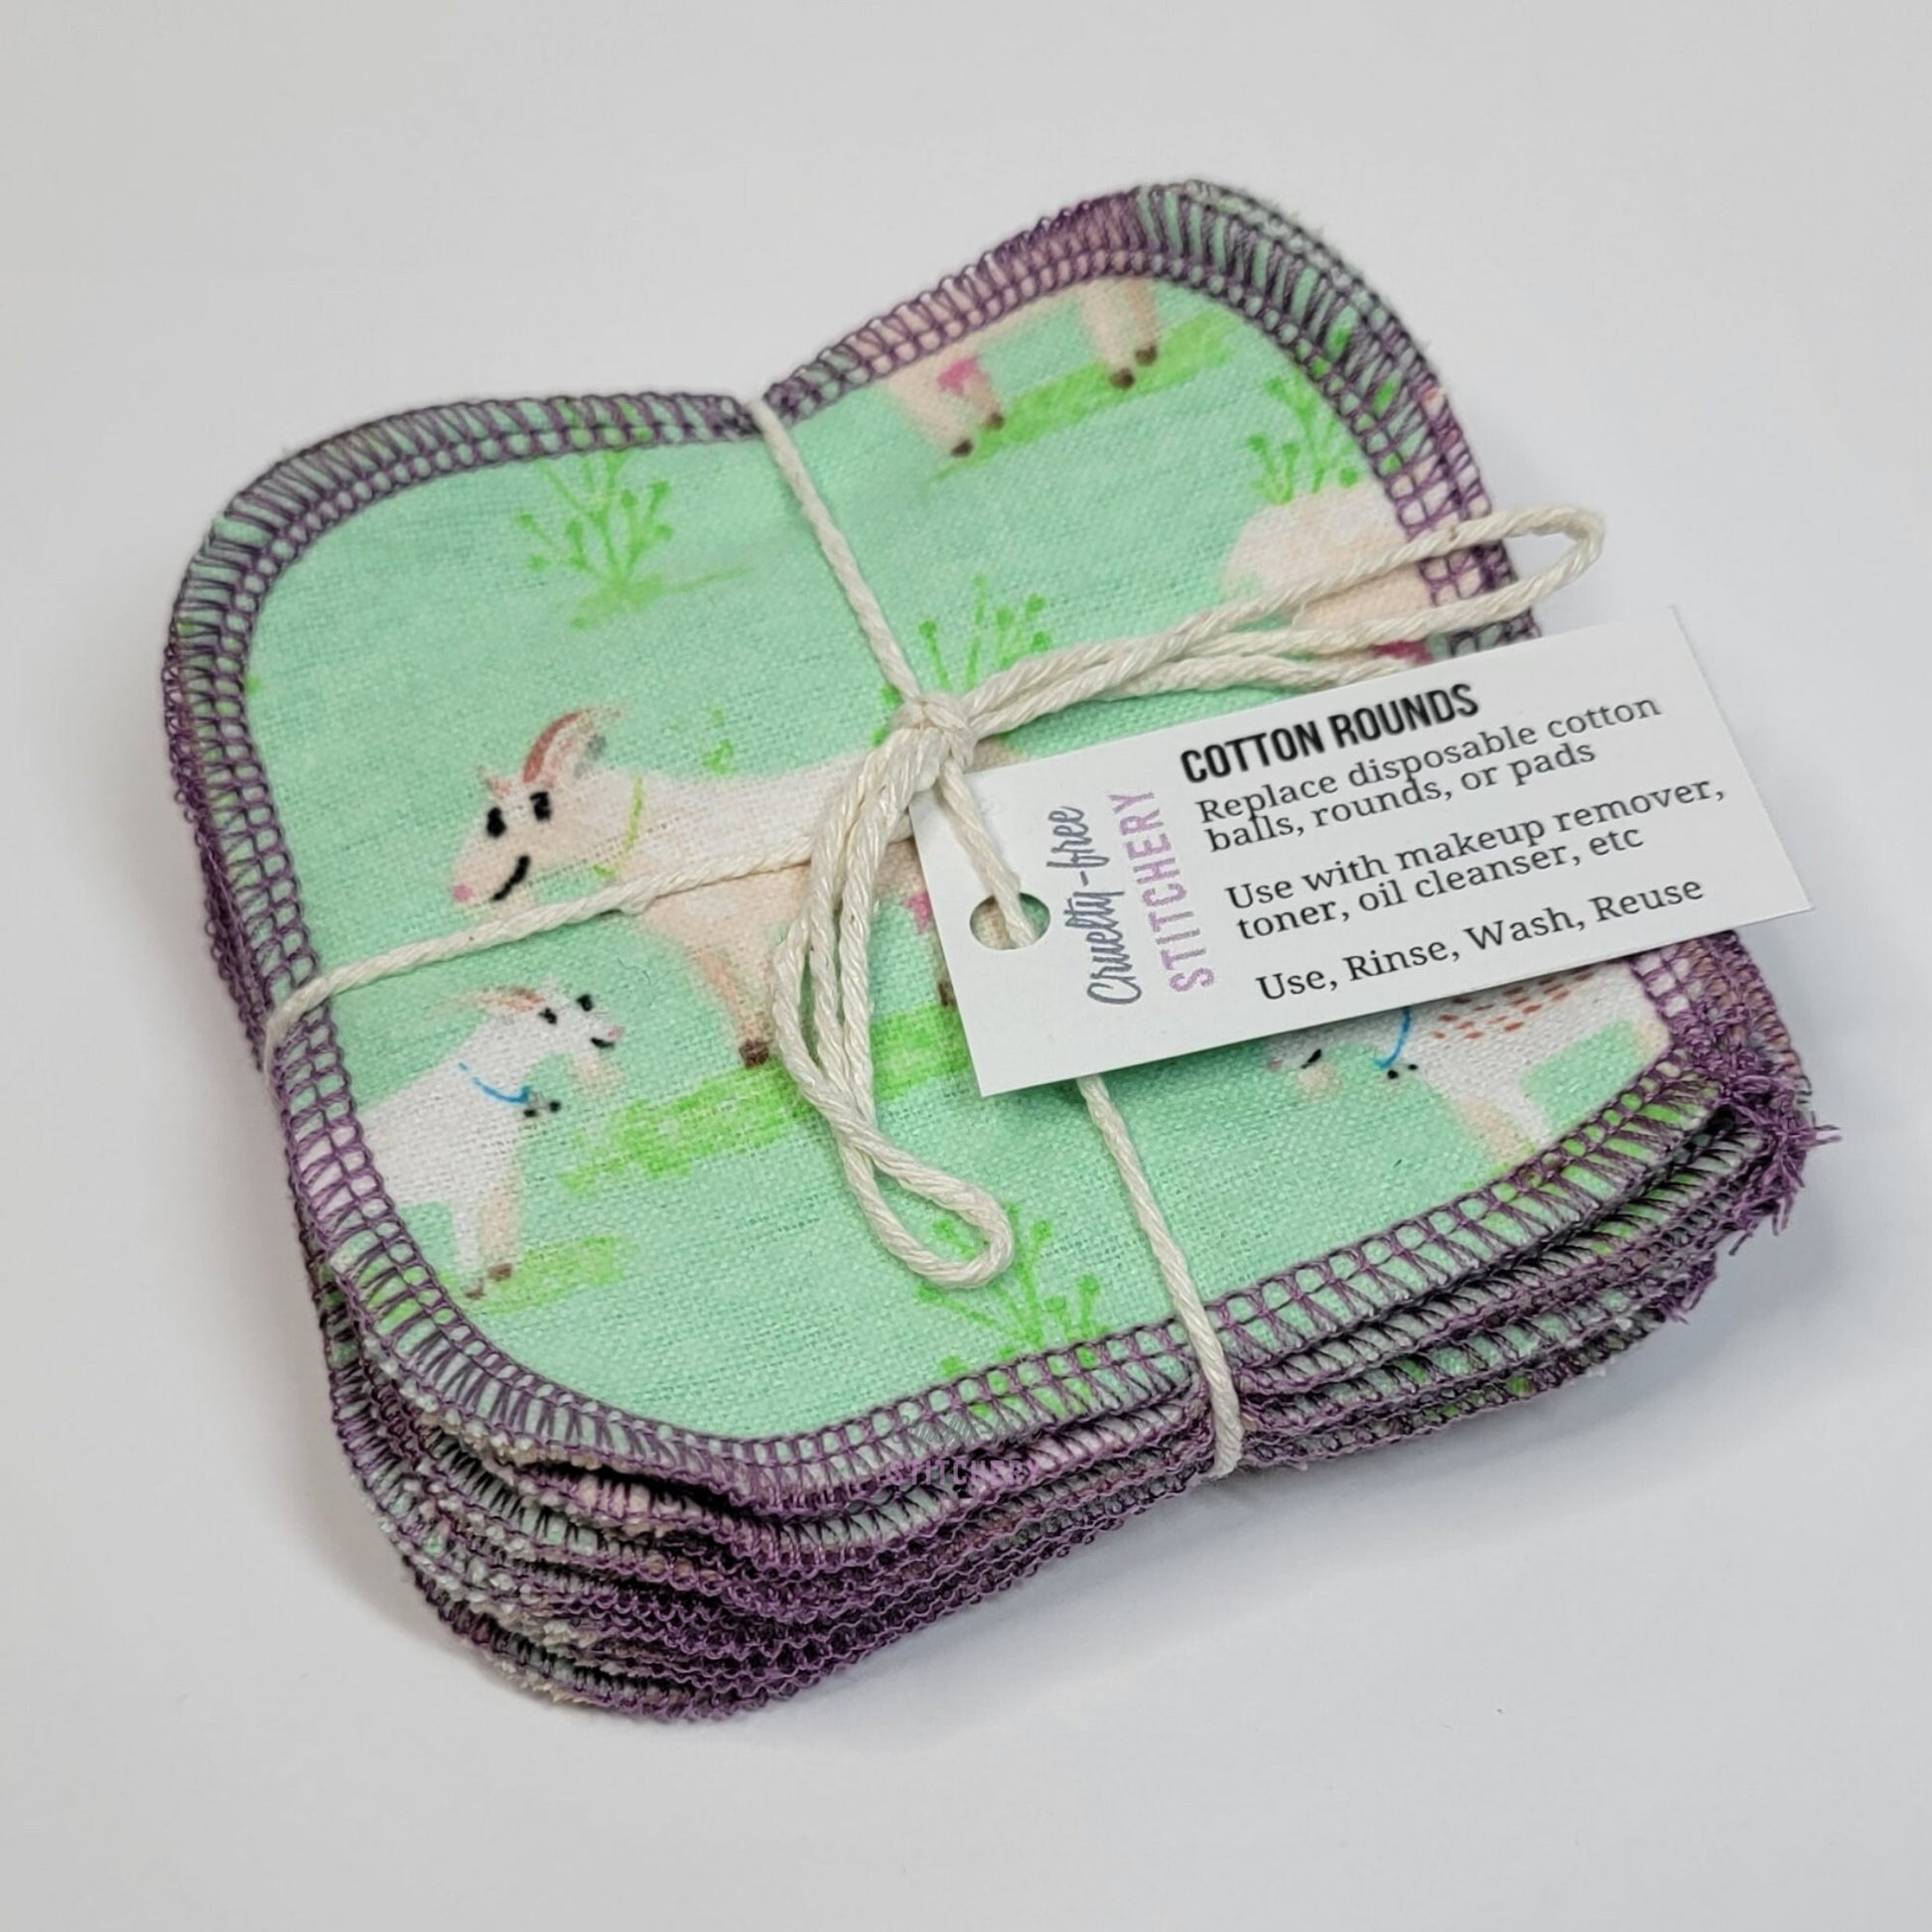 A bundled pack of the goats print reusable cotton rounds. They are tied with a thin white string like a gift, and have a small paper tag.